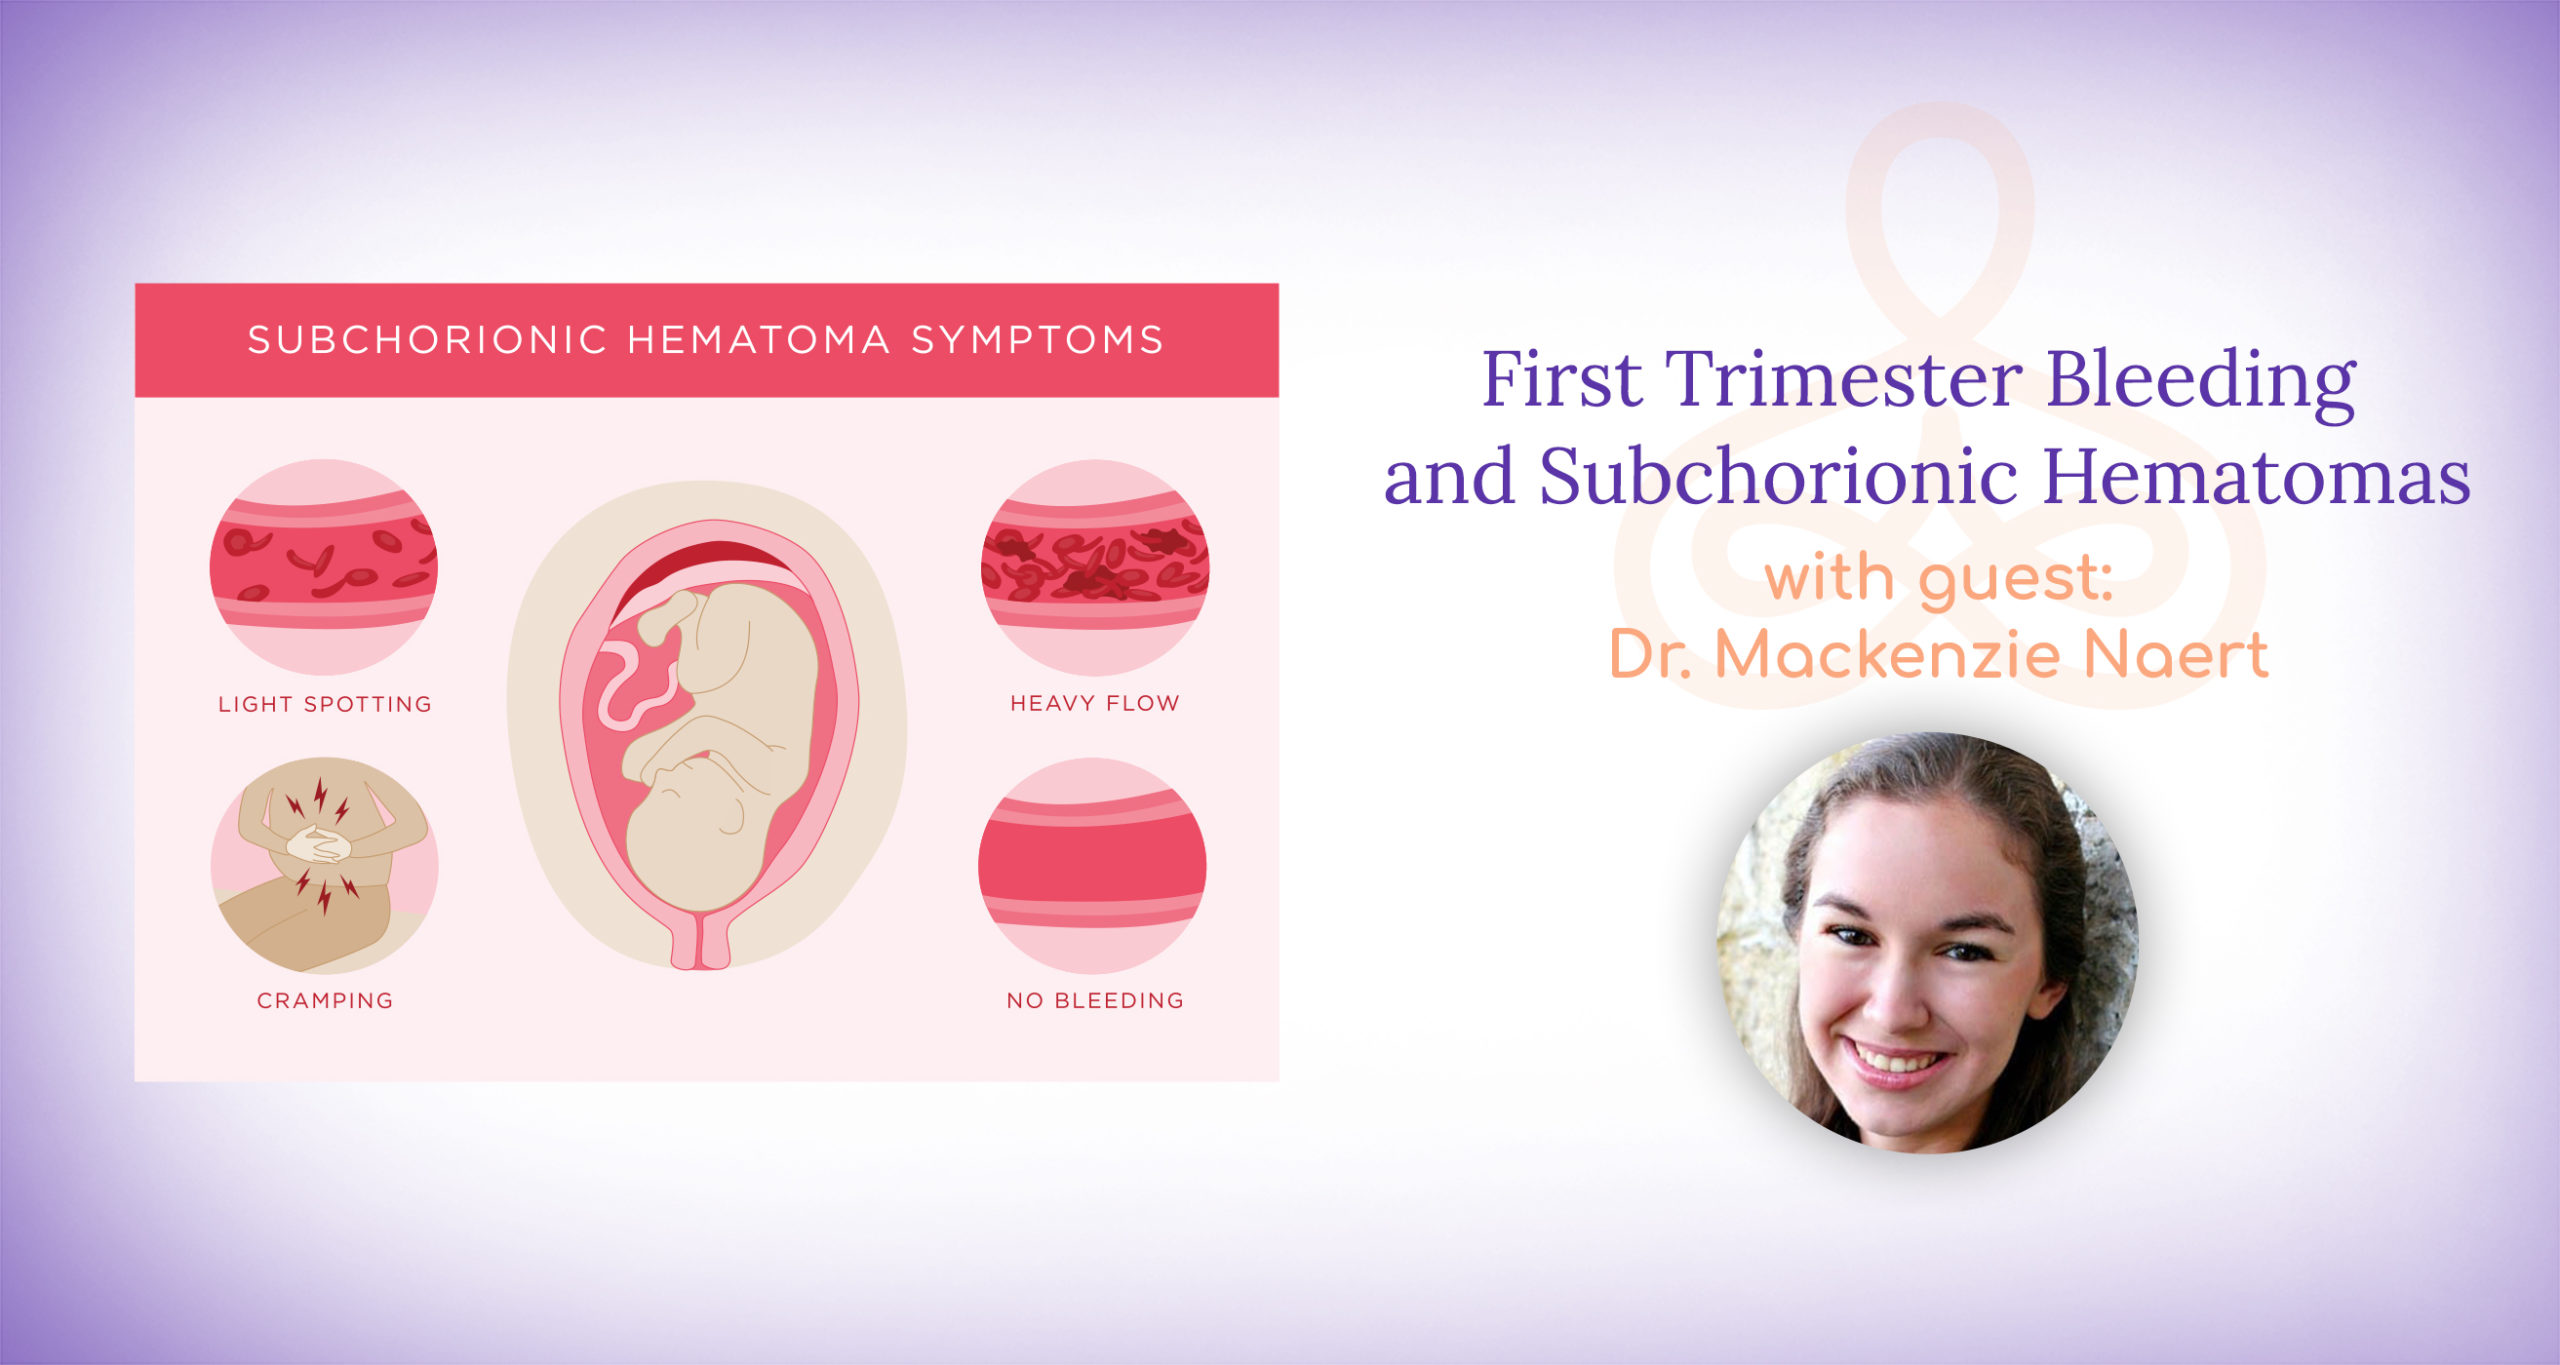 "First Trimester Bleeding and Subchorionic Hematomas" with Dr